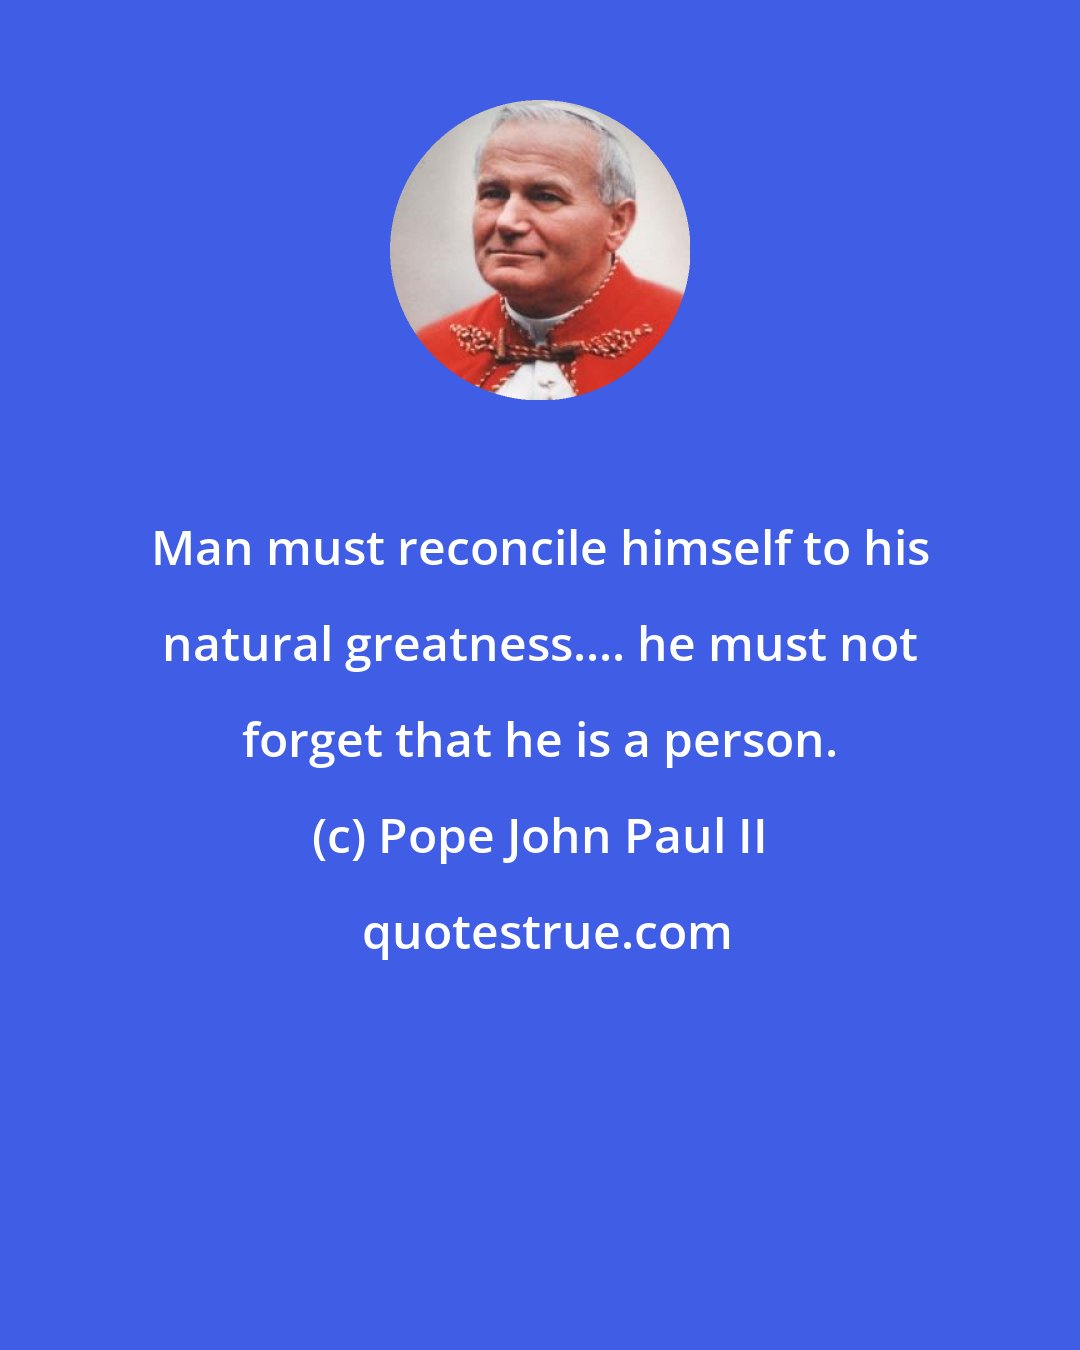 Pope John Paul II: Man must reconcile himself to his natural greatness.... he must not forget that he is a person.